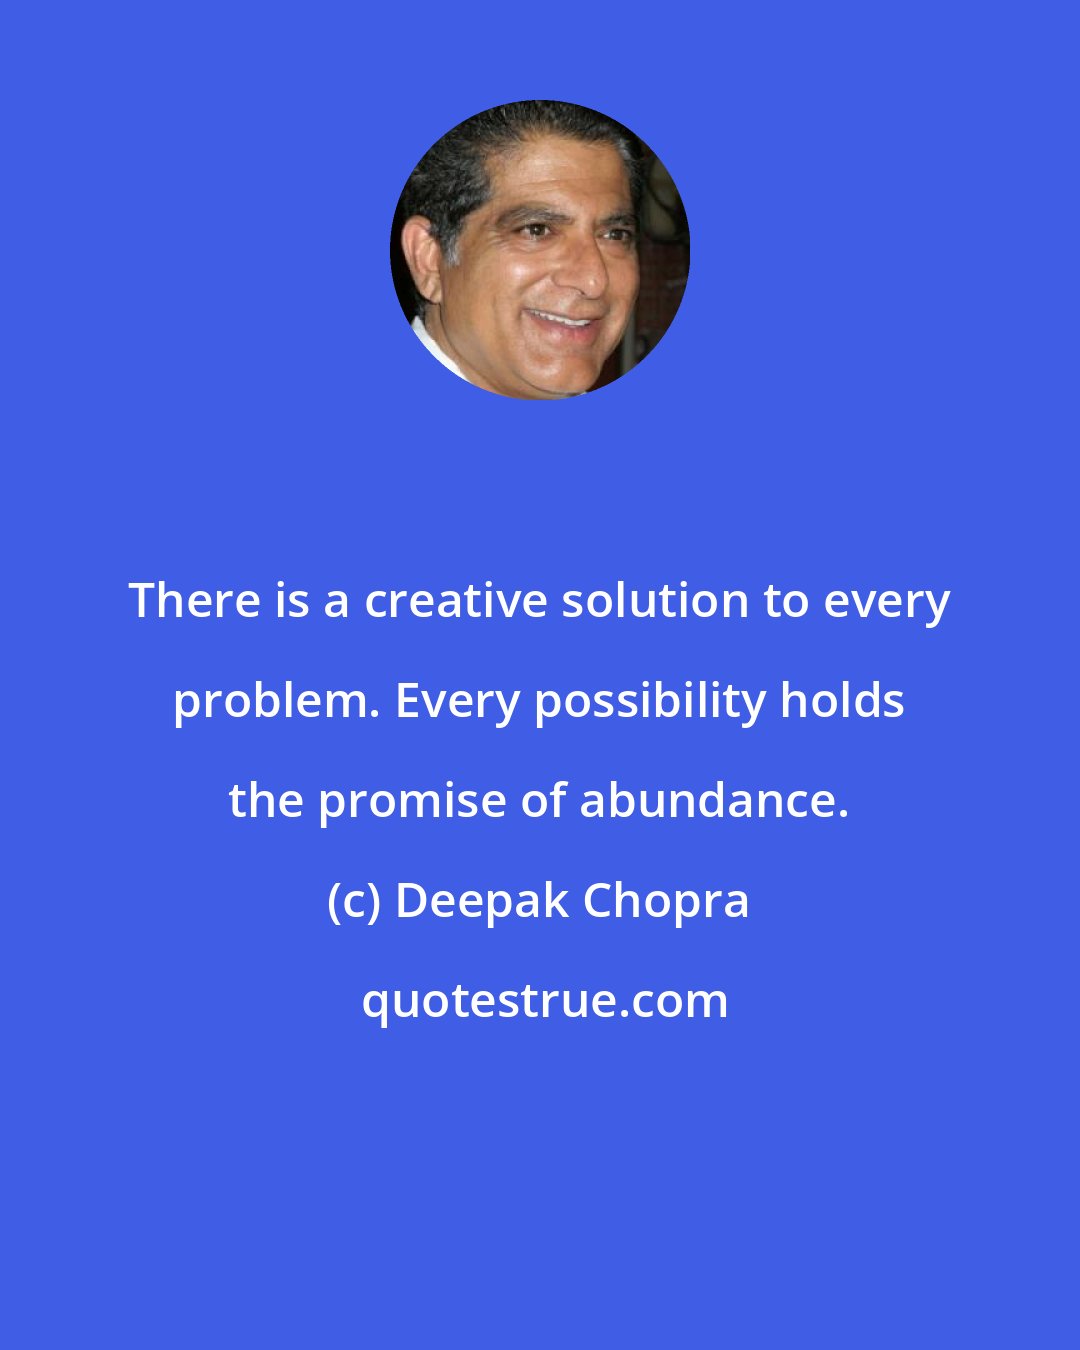 Deepak Chopra: There is a creative solution to every problem. Every possibility holds the promise of abundance.